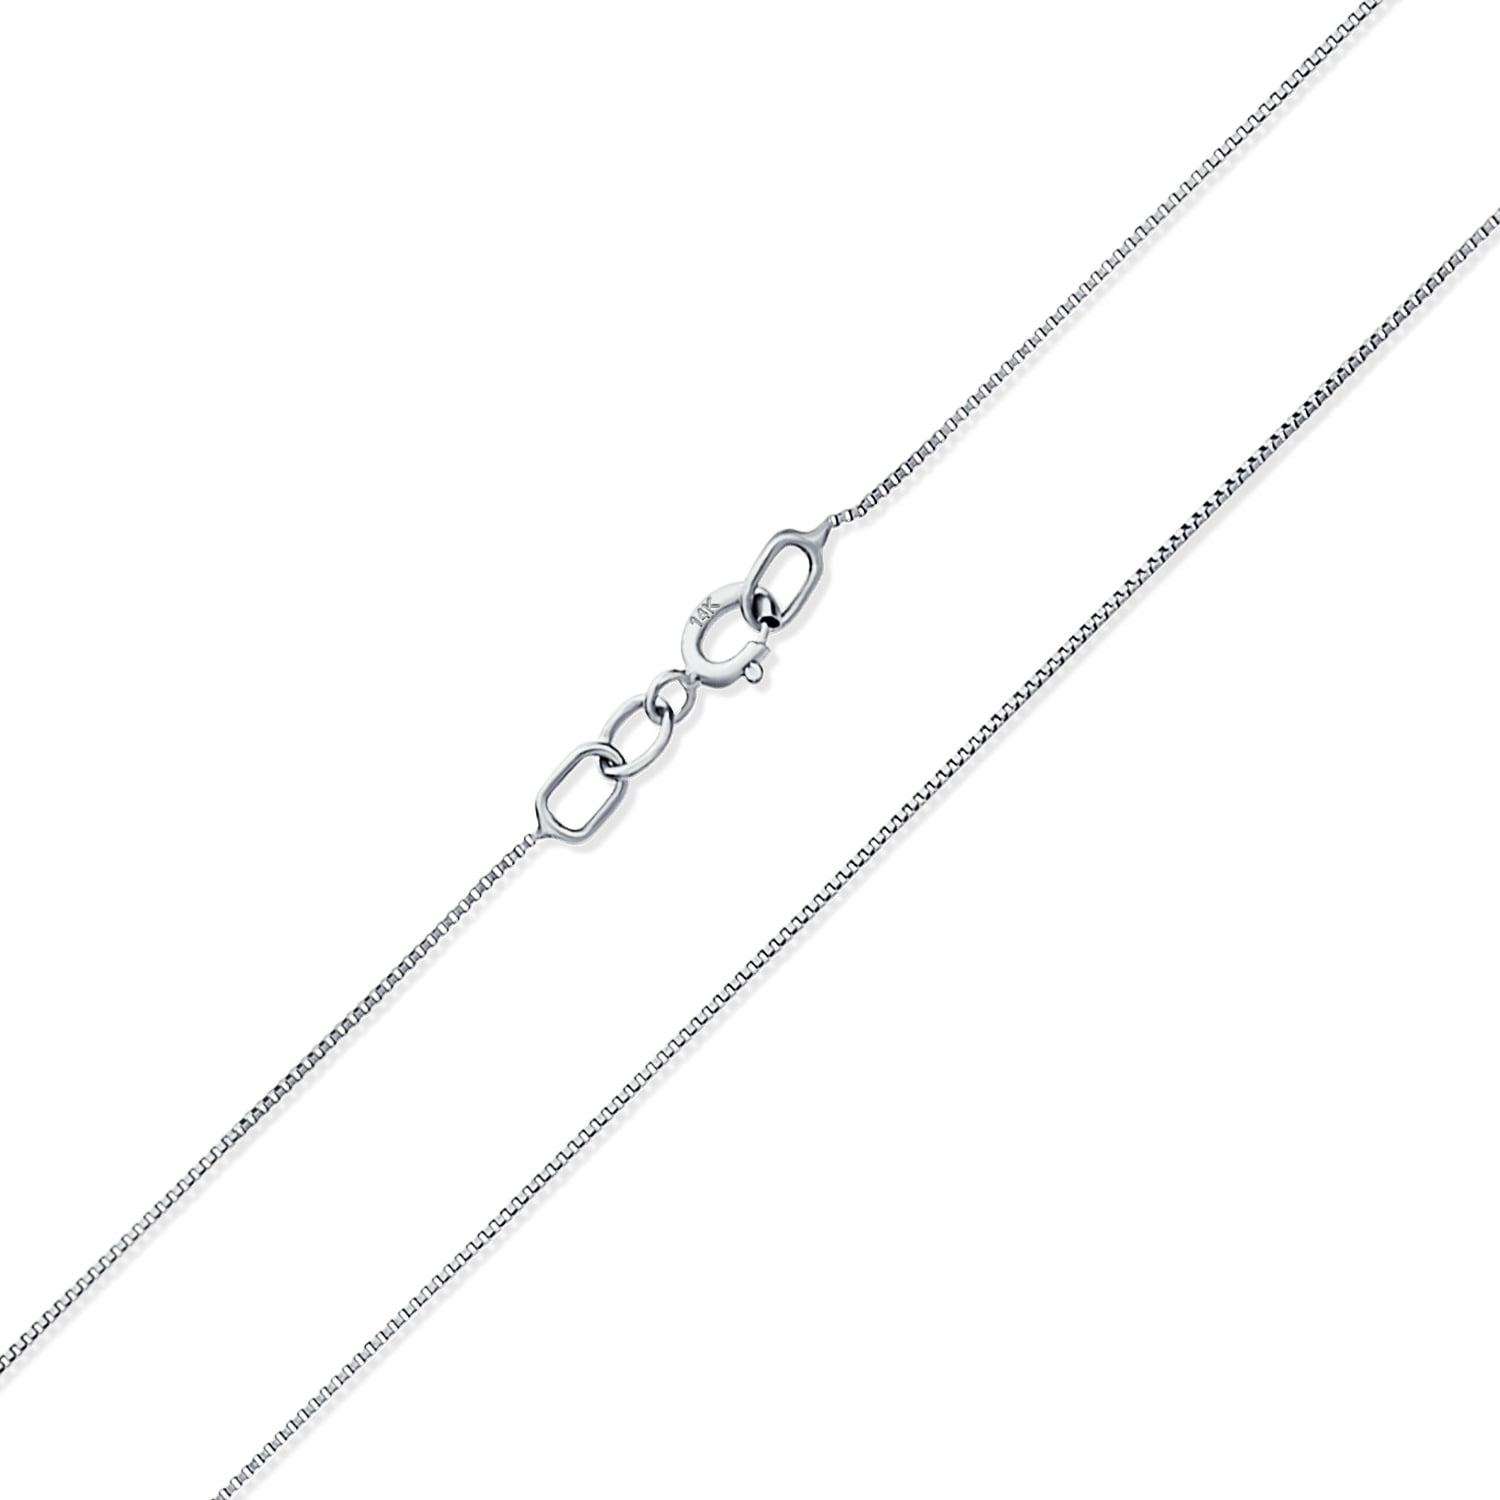 0.6MM Cable Chain .925 Solid Sterling Silver Sizes 14-24